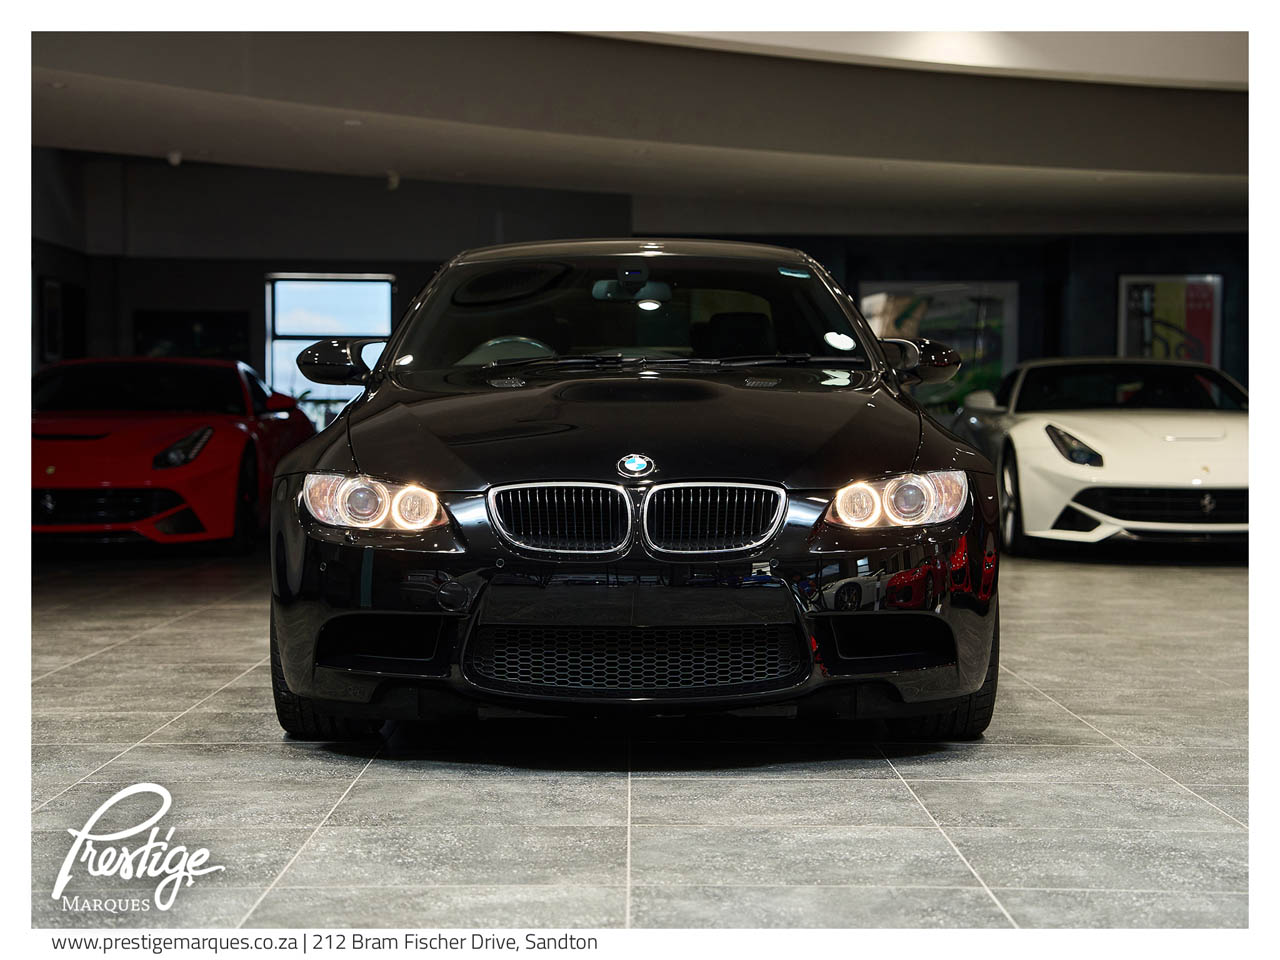 The BMW E92 Competition 